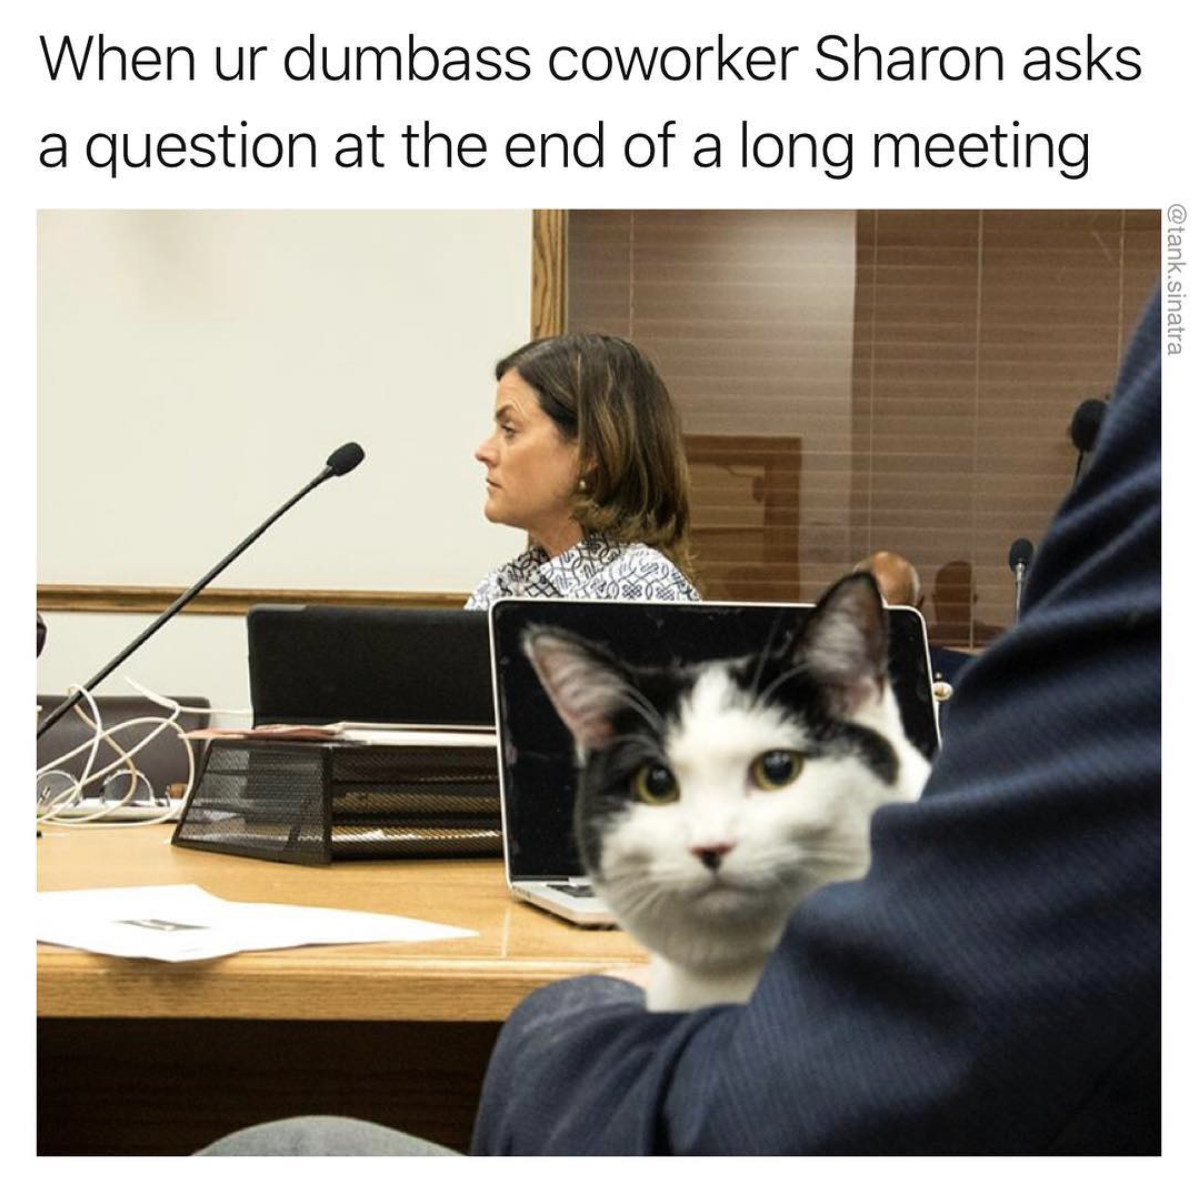 sharon coworker meme - When ur dumbass coworker Sharon asks a question at the end of a long meeting tank Sinatra